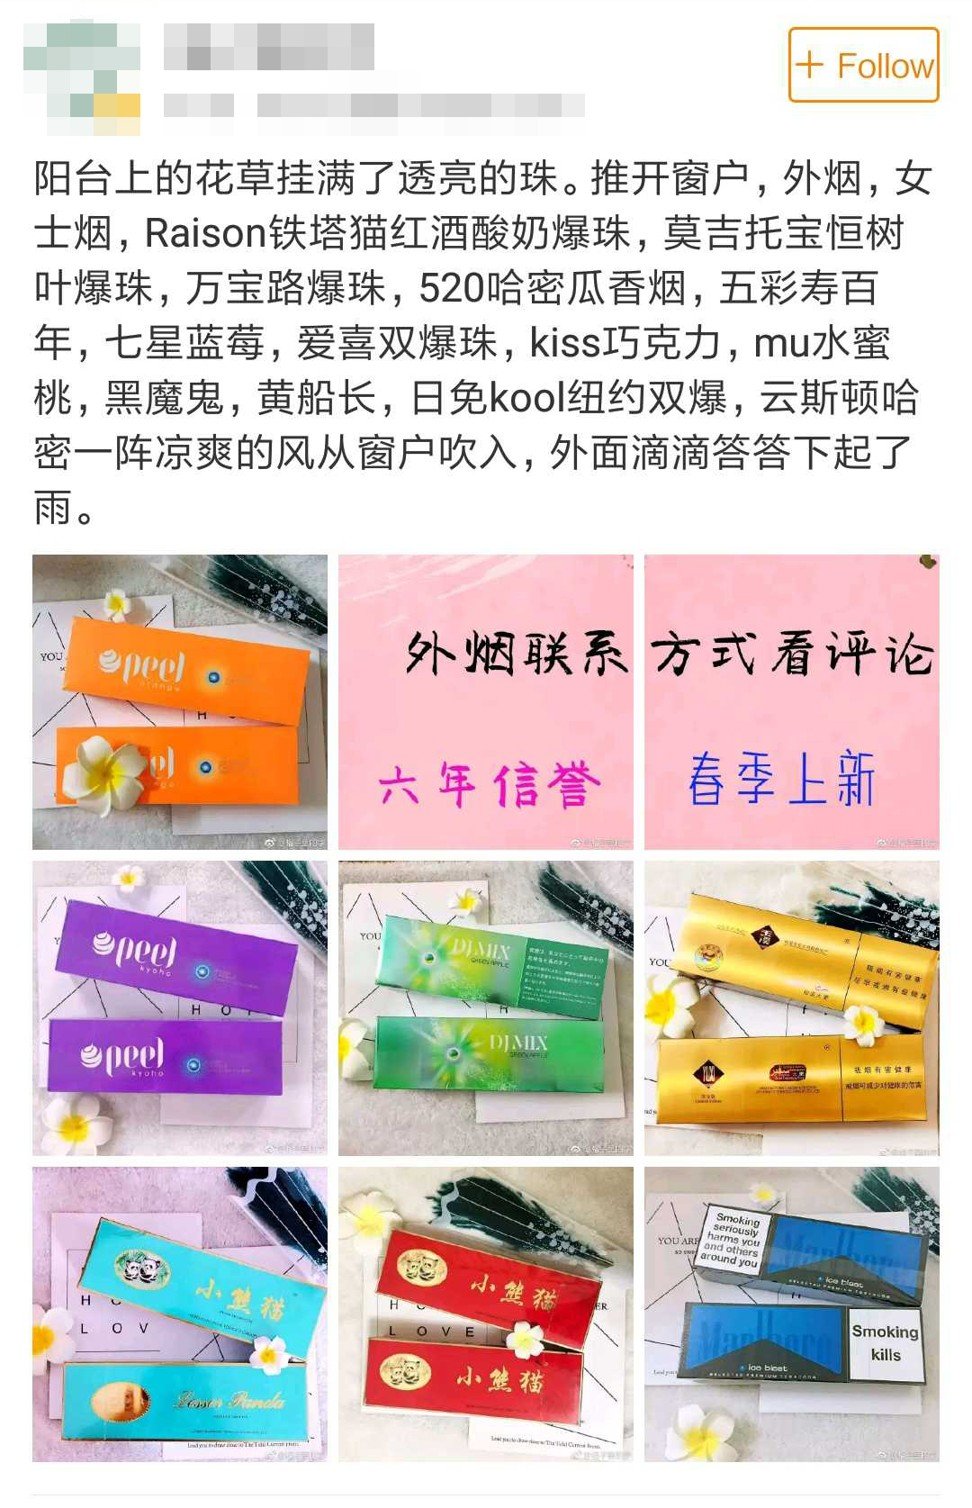 Screenshot from Weibo of an advertisement for imported cigarettes. Photo: Handout